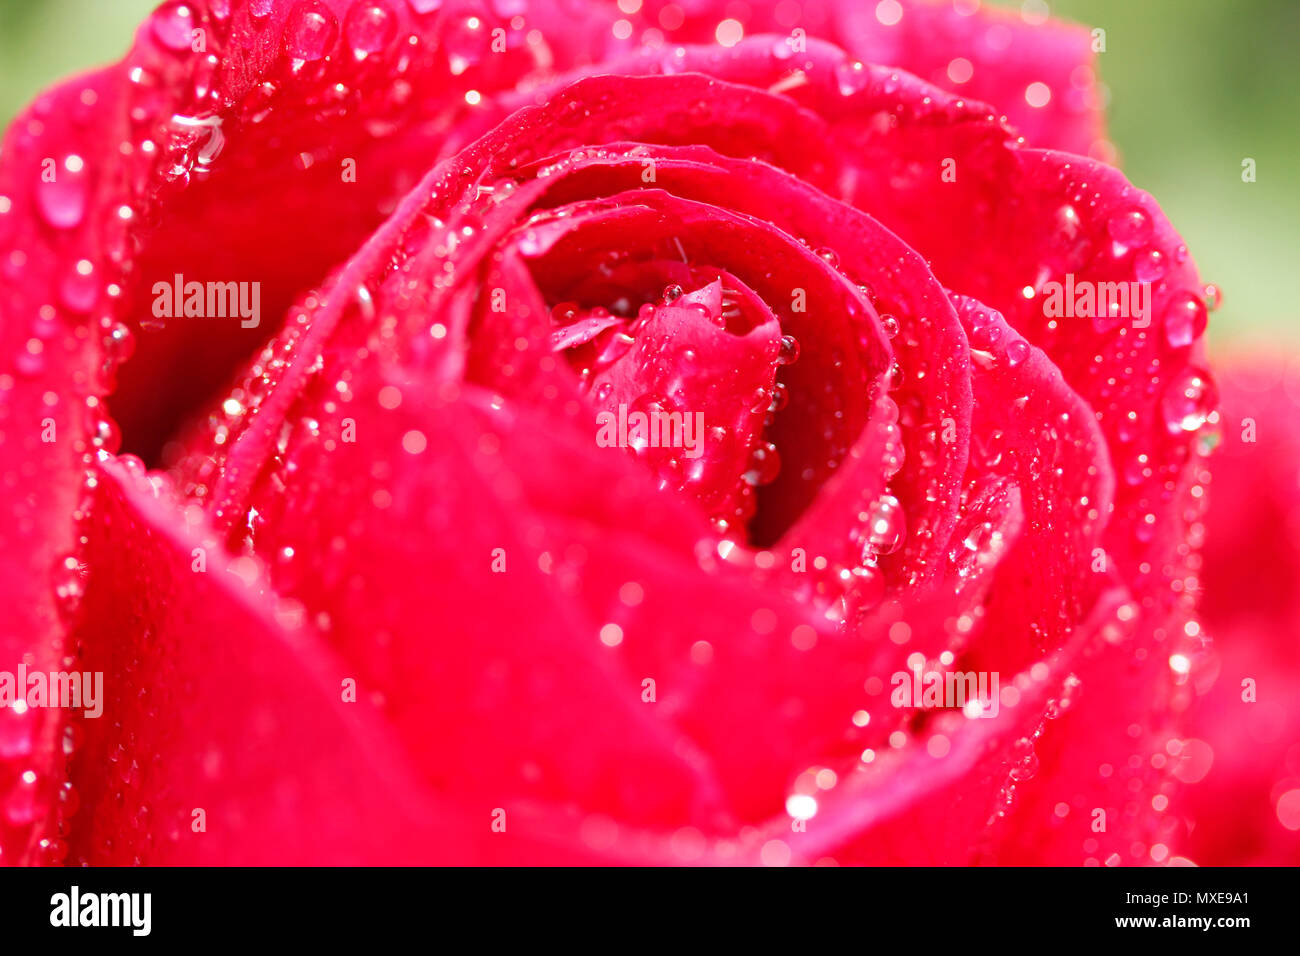 Rose flower with droplets. Stock Photo